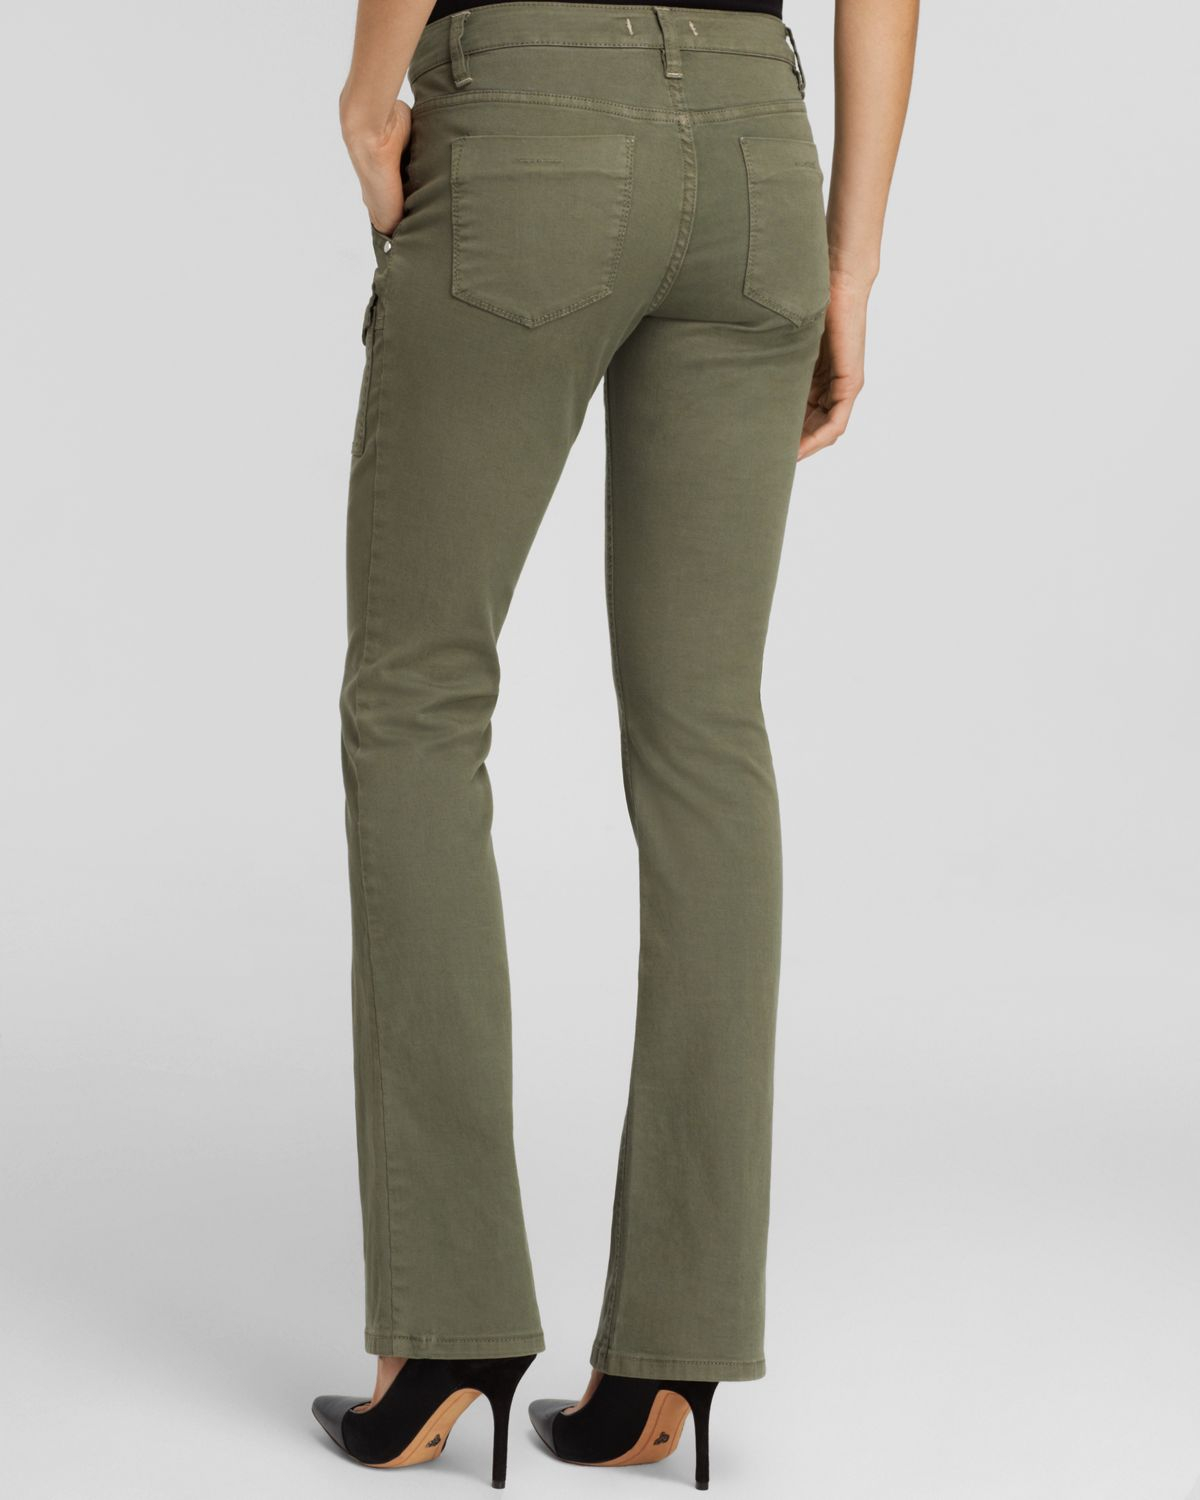 Sanctuary Bootcut Cargo Pants in Army Green (Green) - Lyst